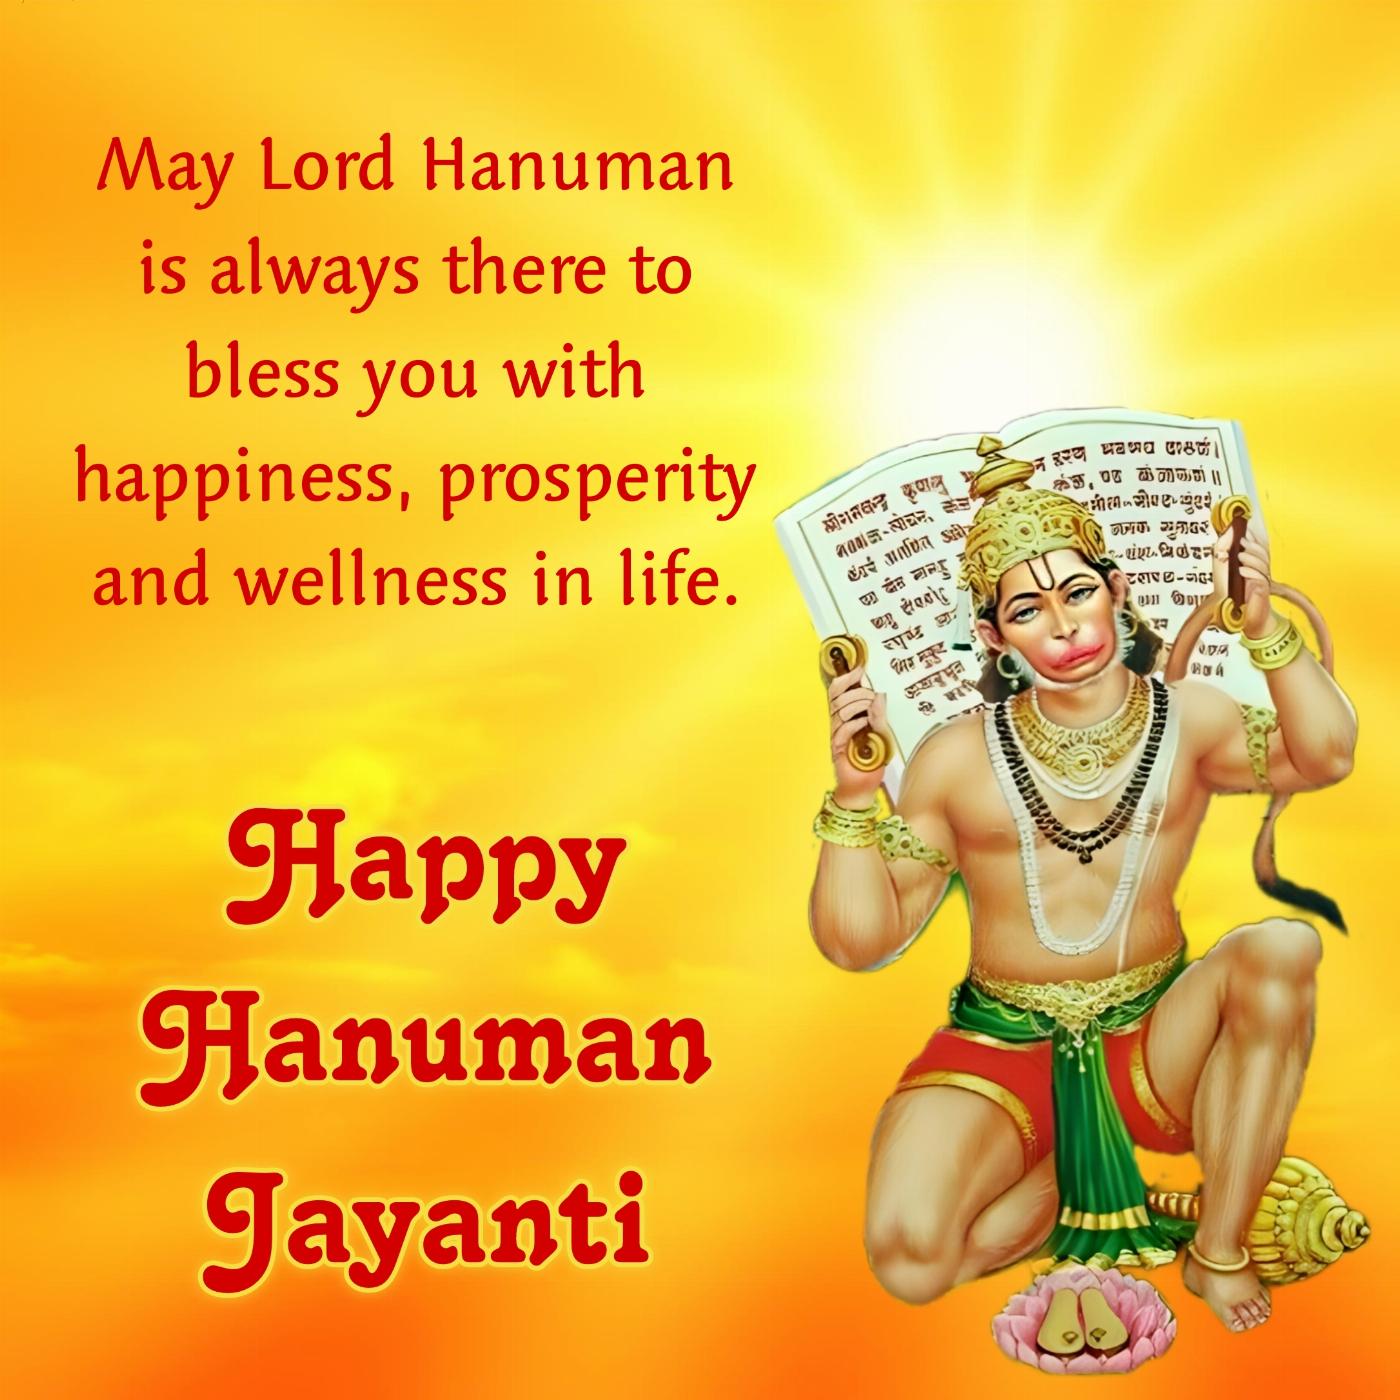 May Lord Hanuman is always there to bless you with happiness